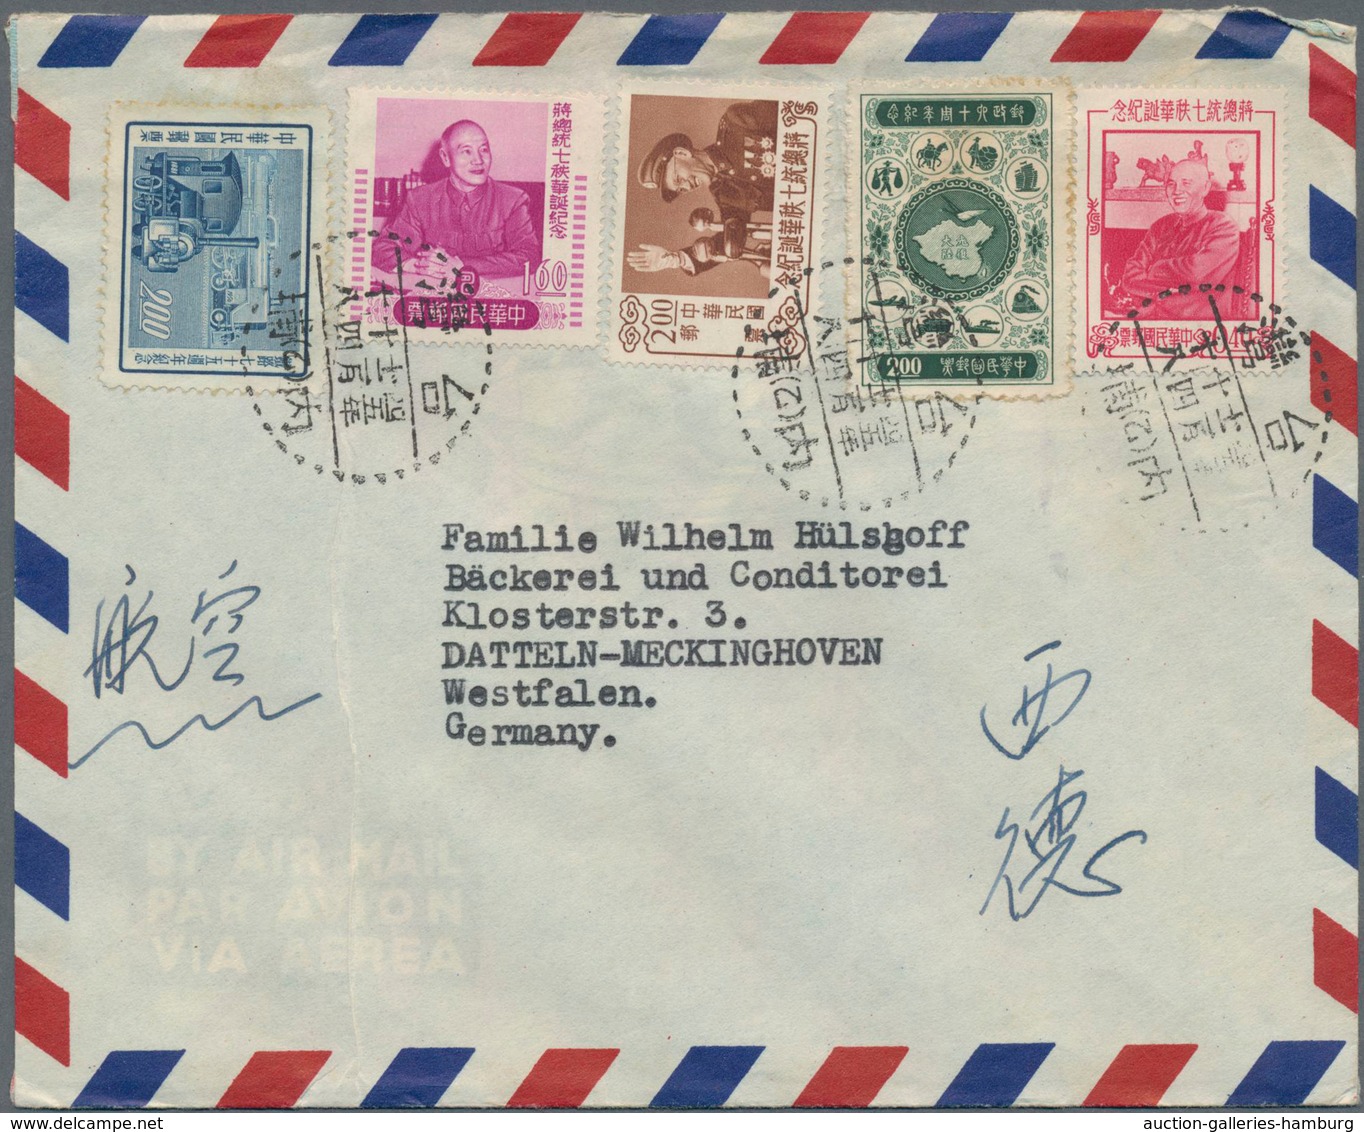 China - Taiwan (Formosa): 1958/80, covers (66) mostly by air mail to Germany or US, some inland and